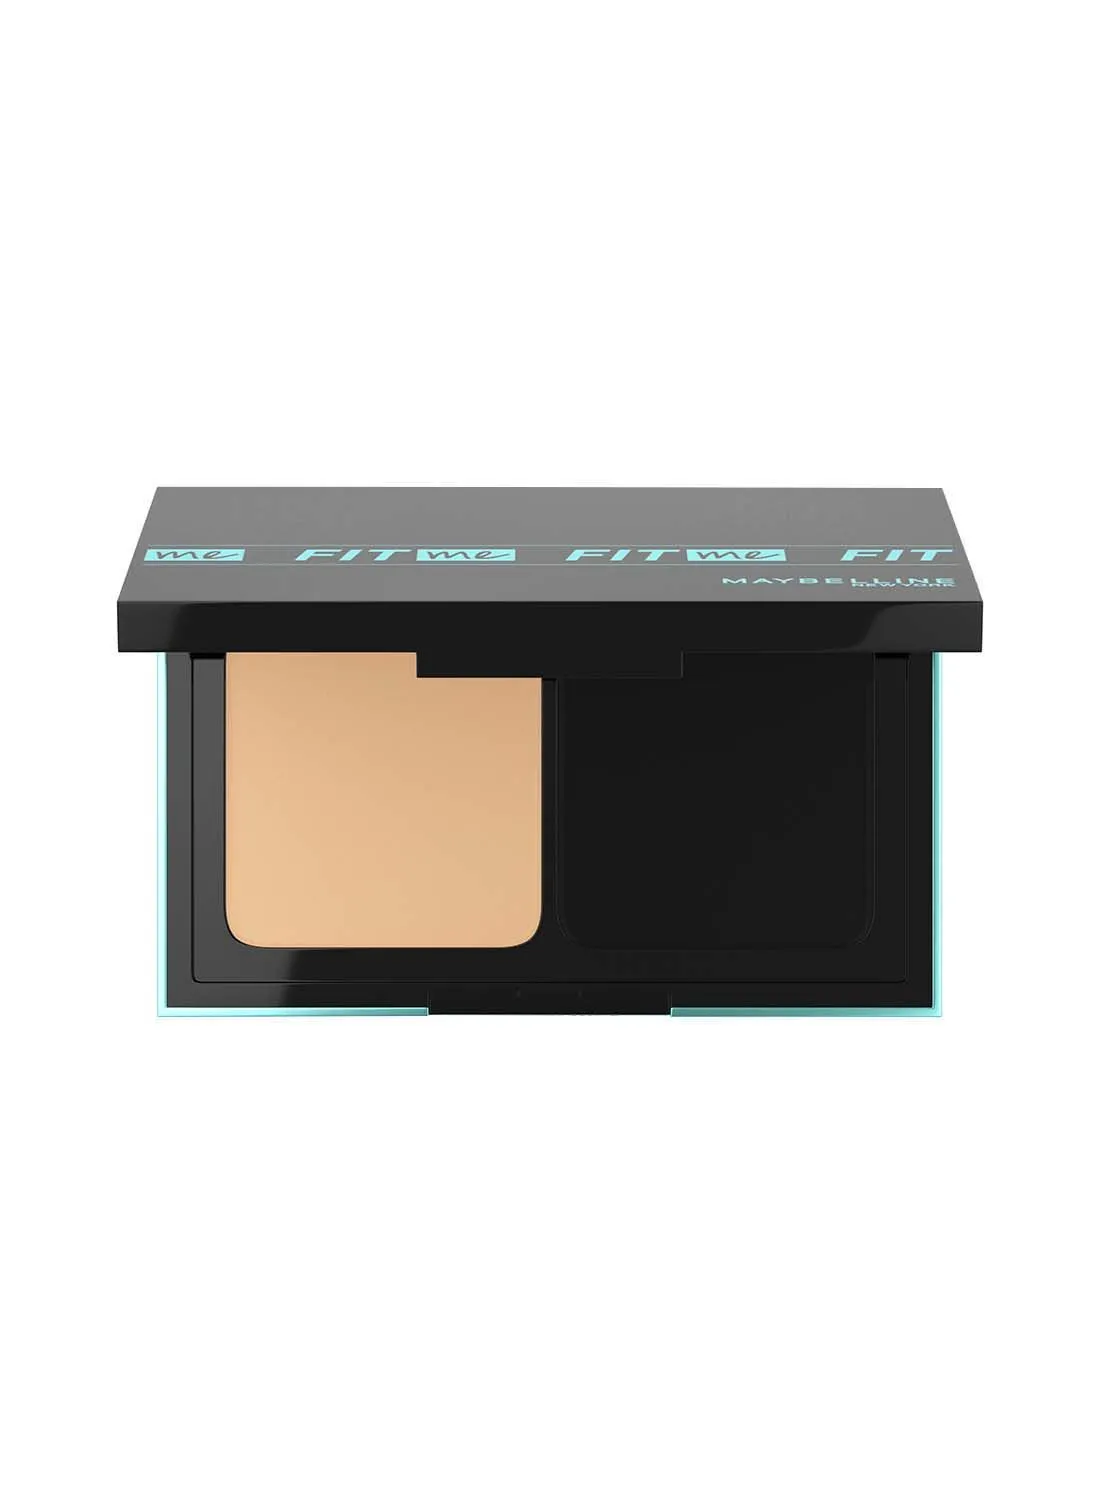 MAYBELLINE NEW YORK Maybelline New York, Fit Me foundation in a powder 128 Warm Nude